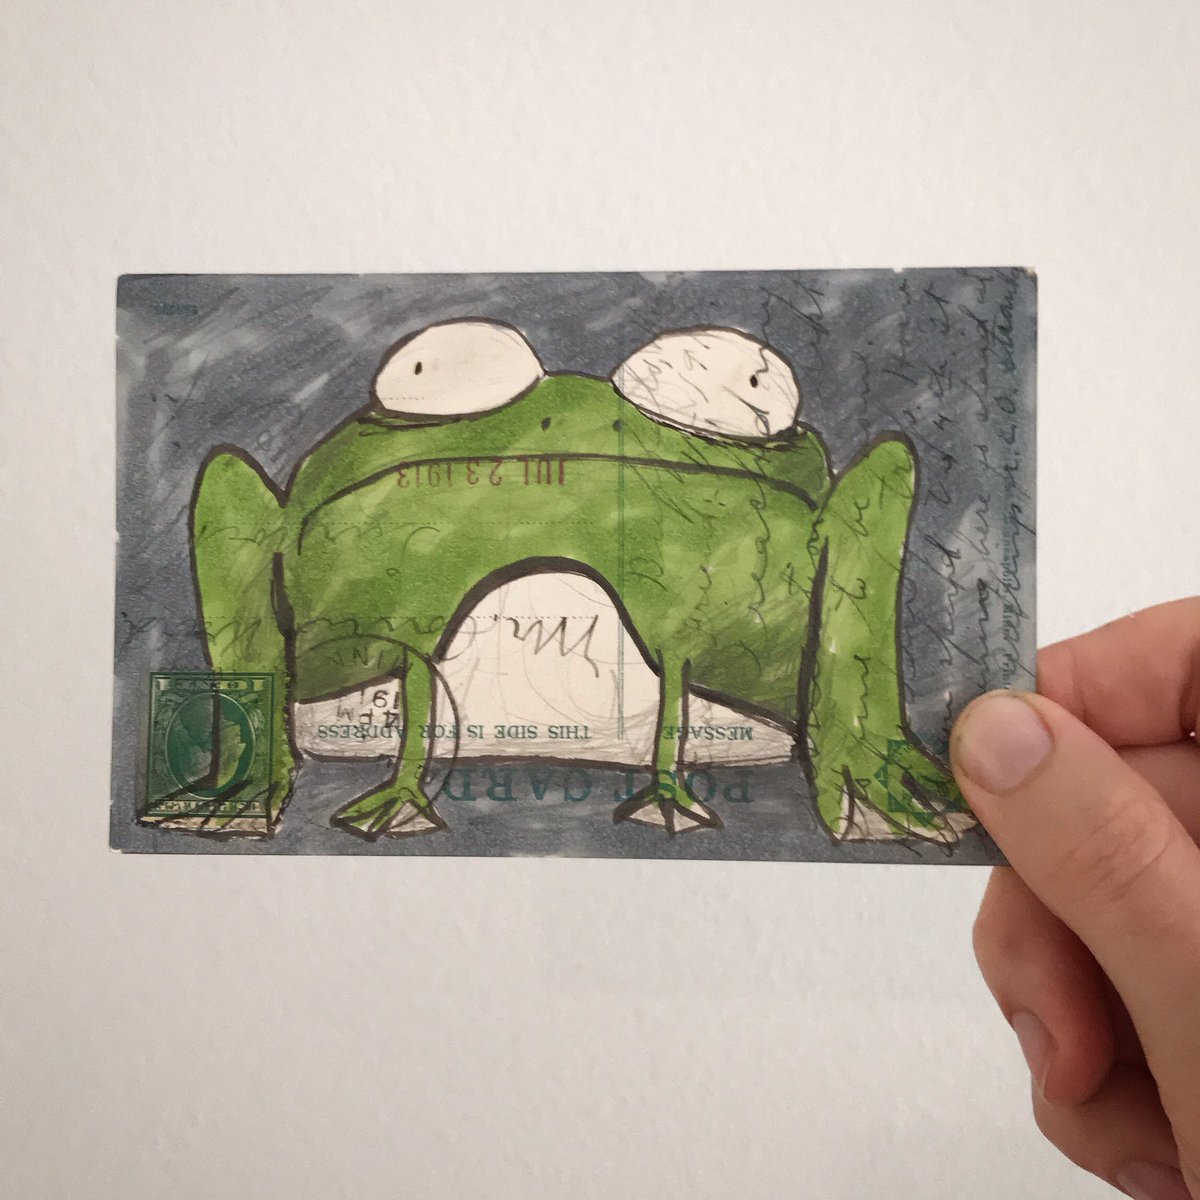 I forgot how fun these things are.
#frog #illustration #foundpaper #318art #inkdrawing #postcardart